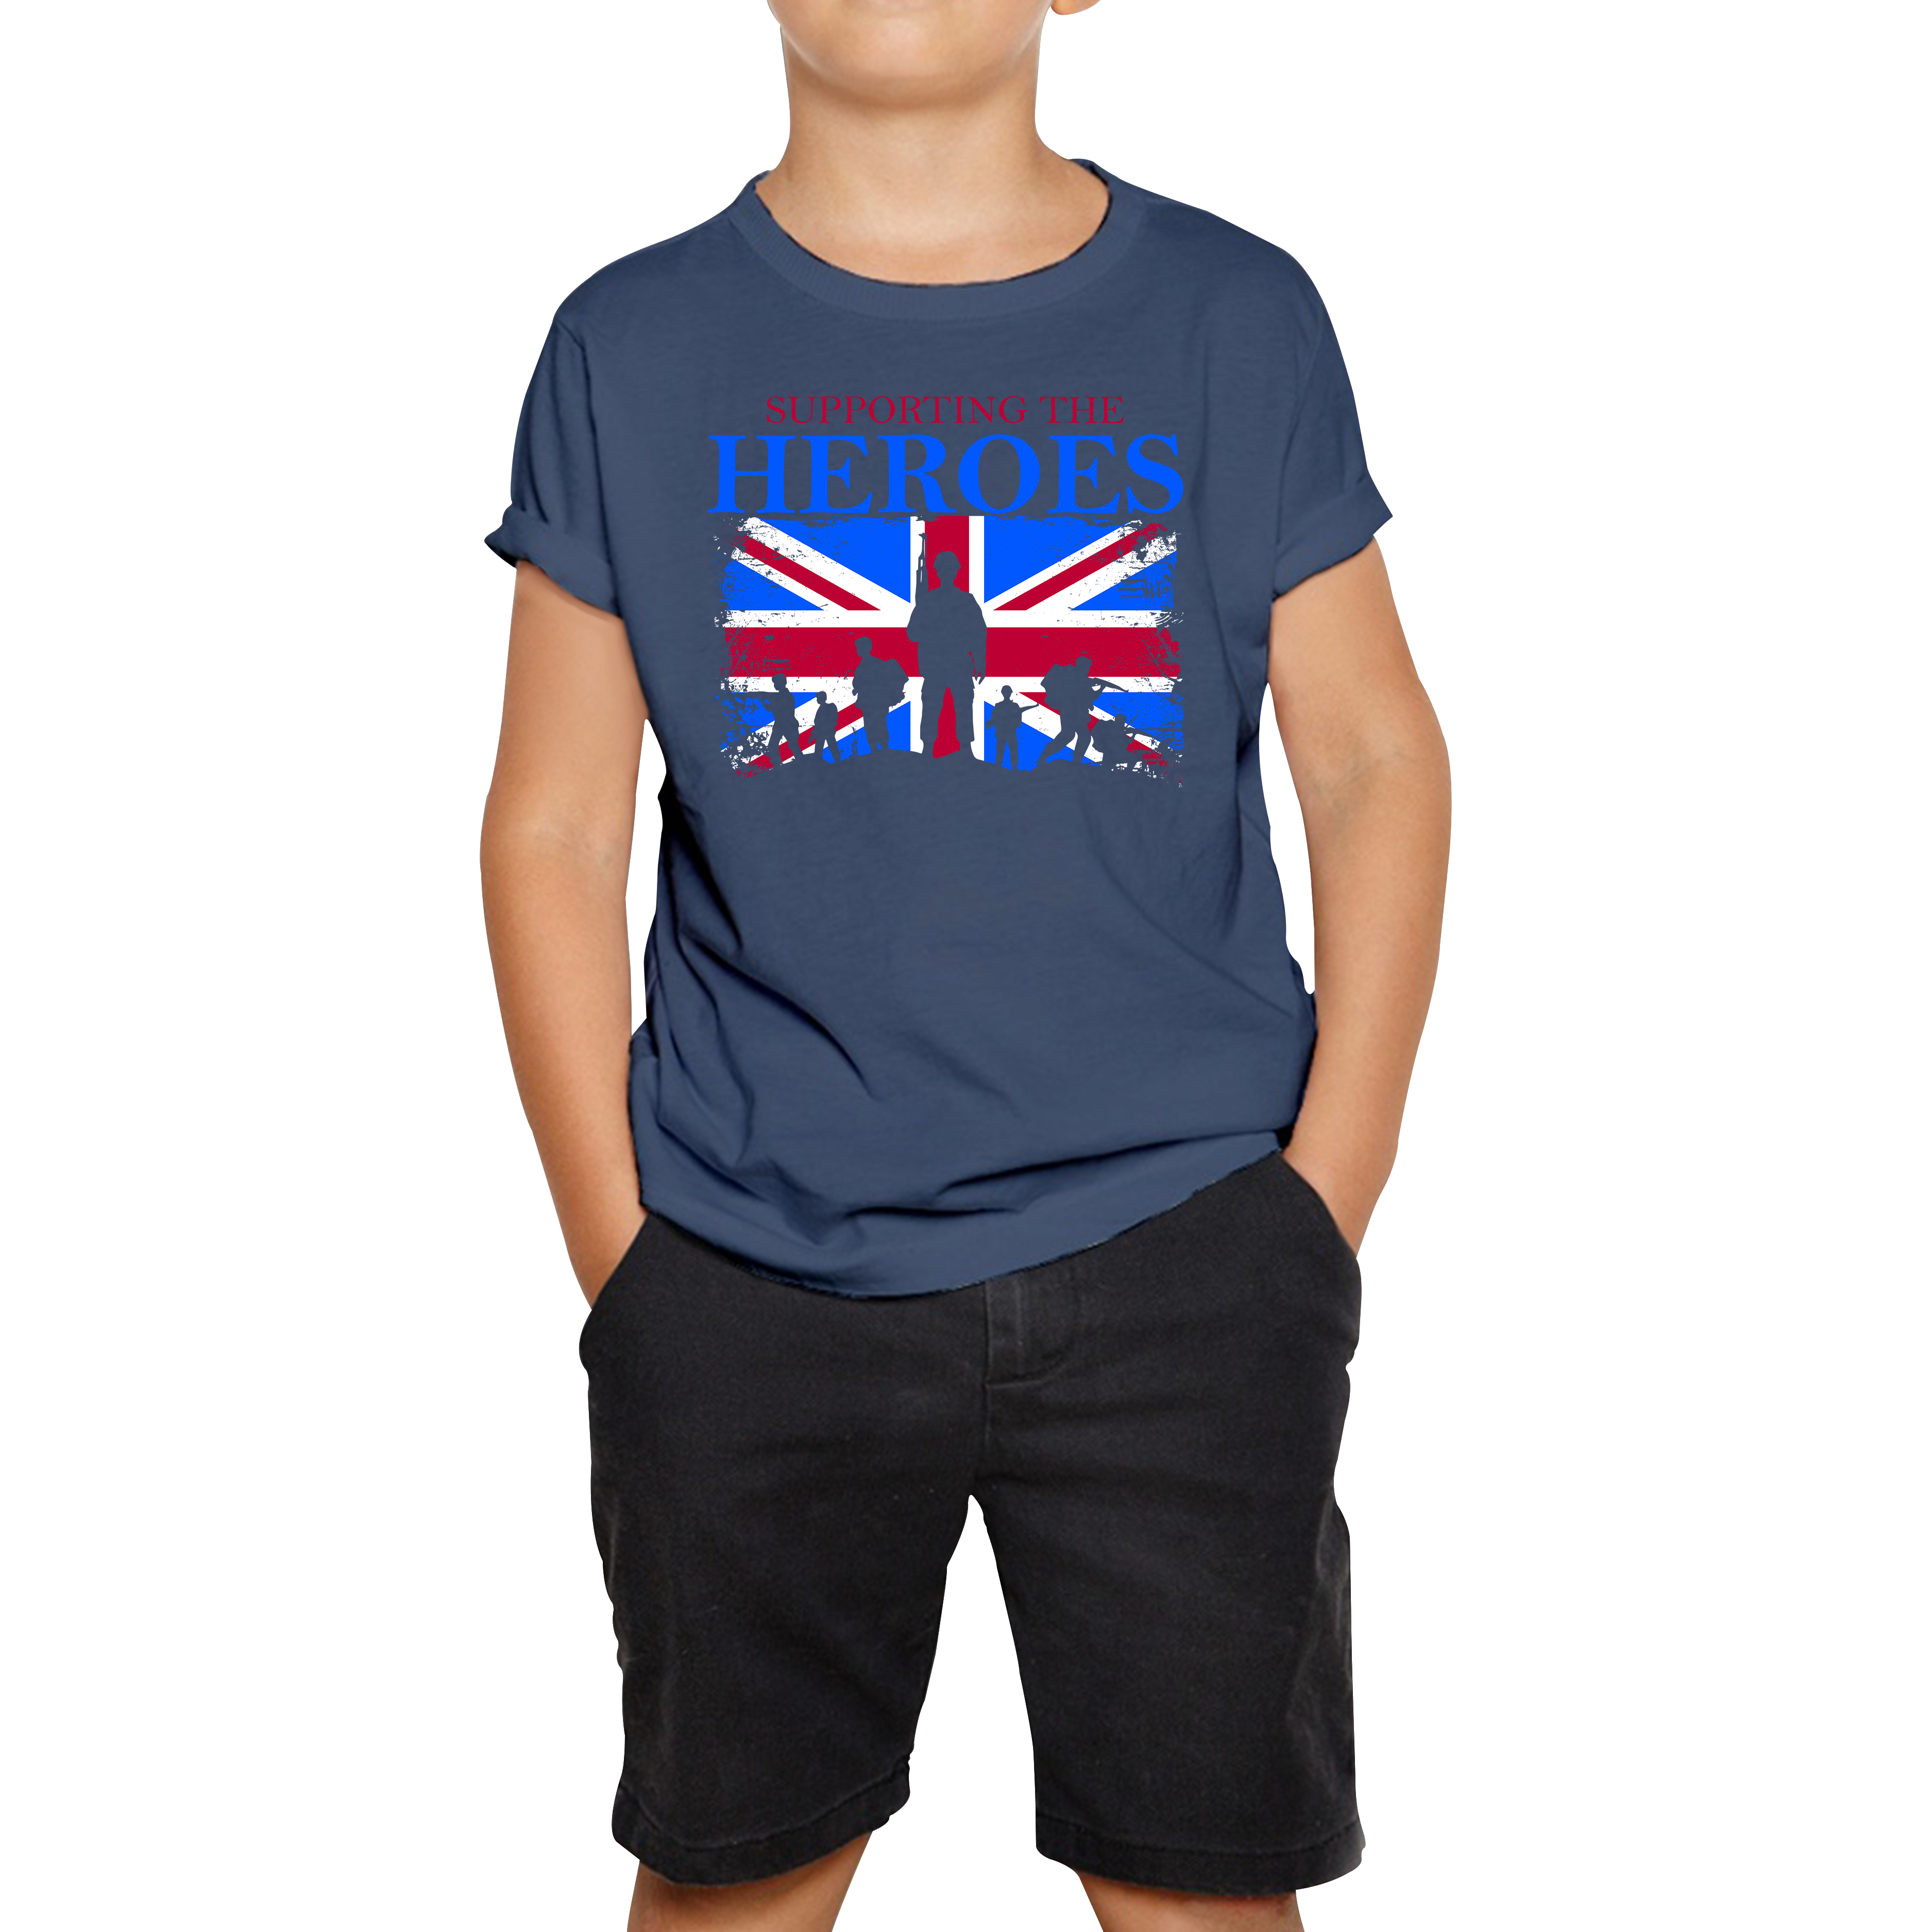 Remembrance Day T-shirt Supporting The Heroes UK Flag British Armed Forces Veteran Kids Tee